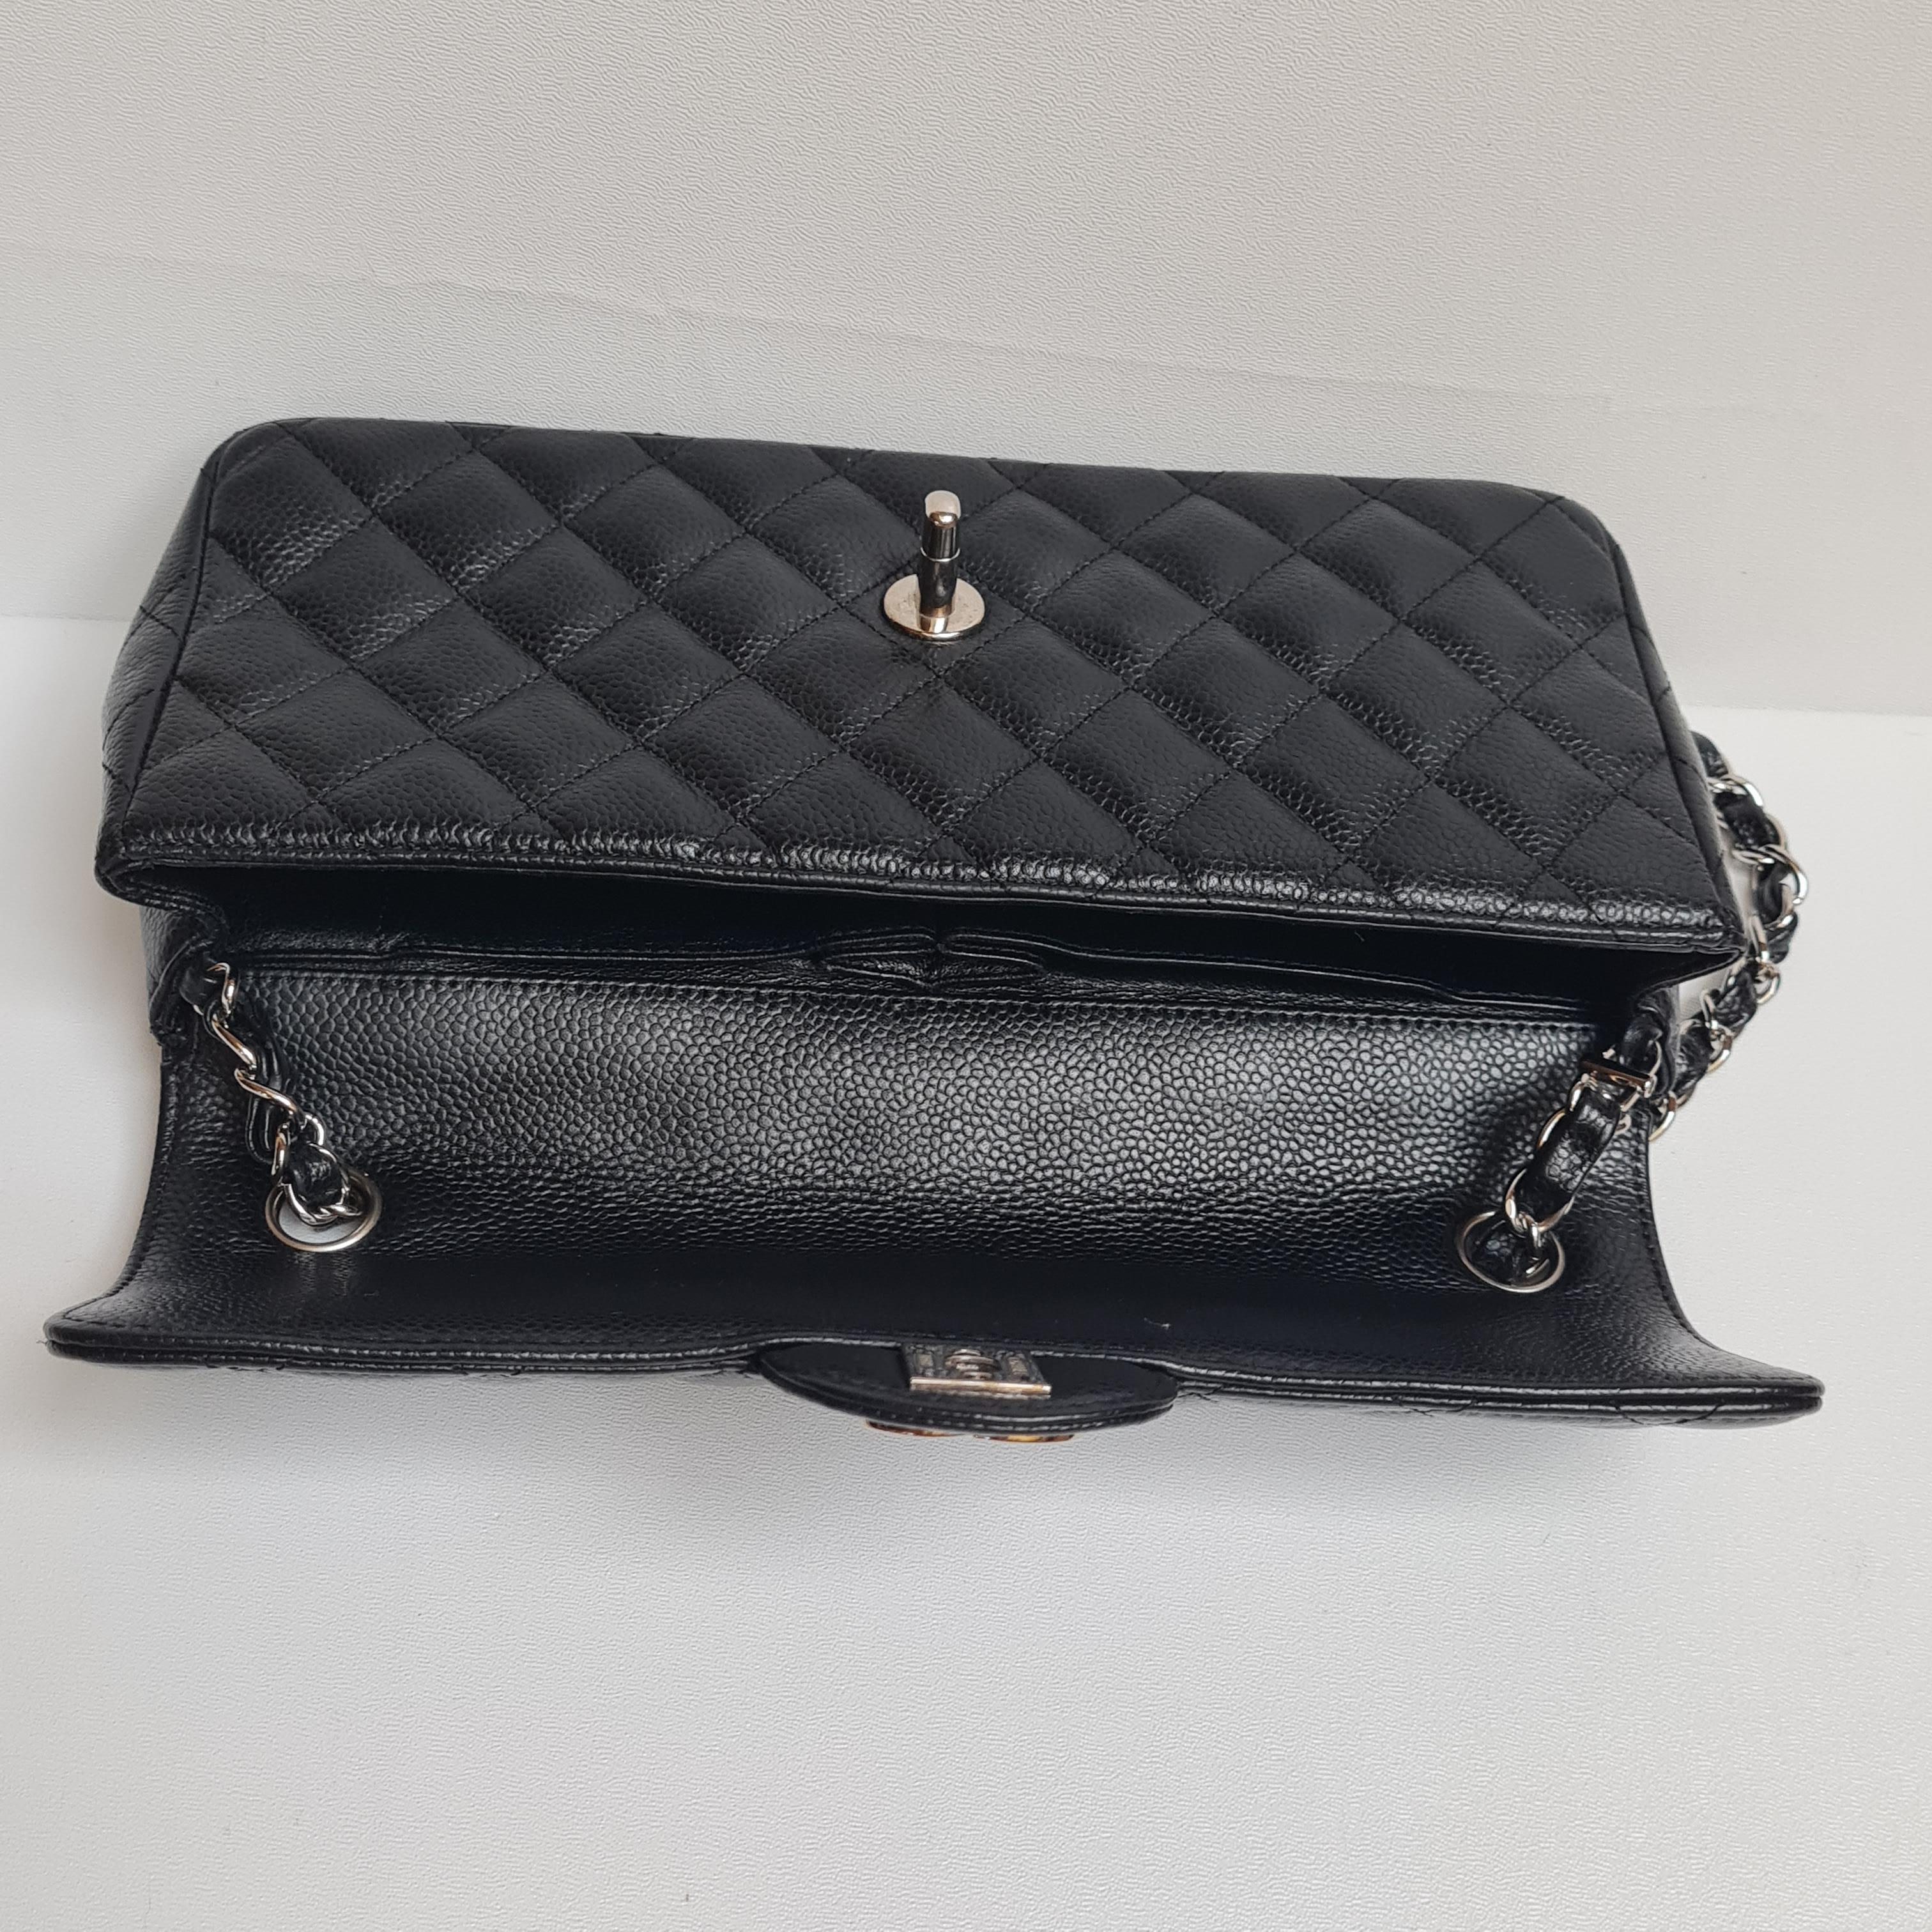 Chanel Black Caviar Quilted East West SHW Flap Bag 13